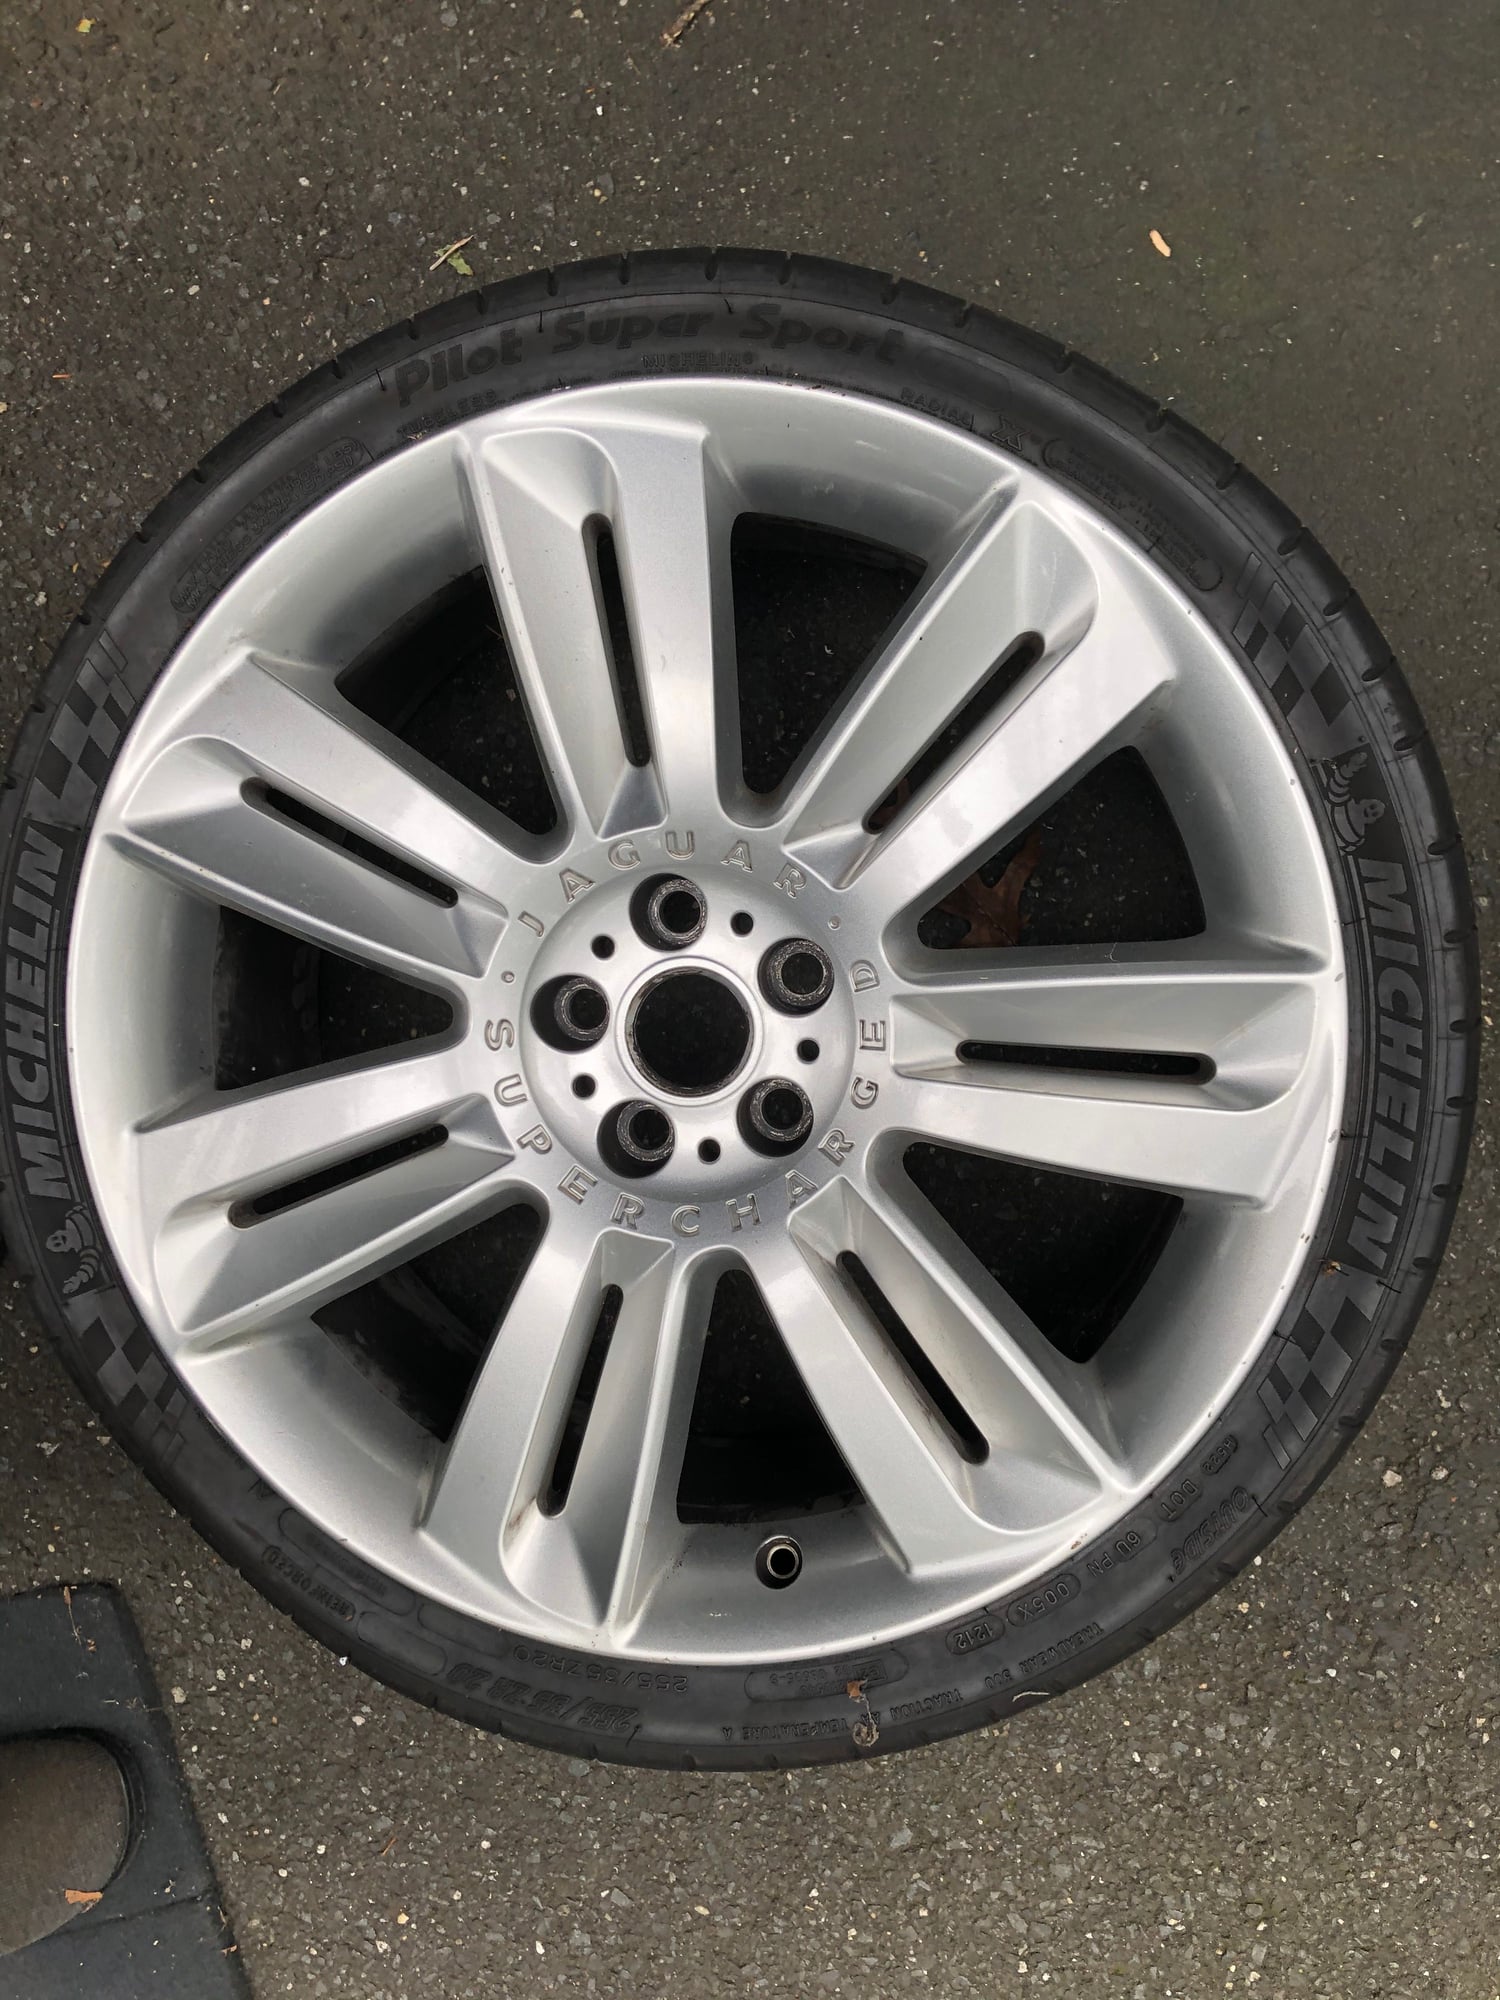 Wheels and Tires/Axles - Front XFR rim - Used - 2010 to 2014 Jaguar XFR - Oakland, NJ 07436, United States